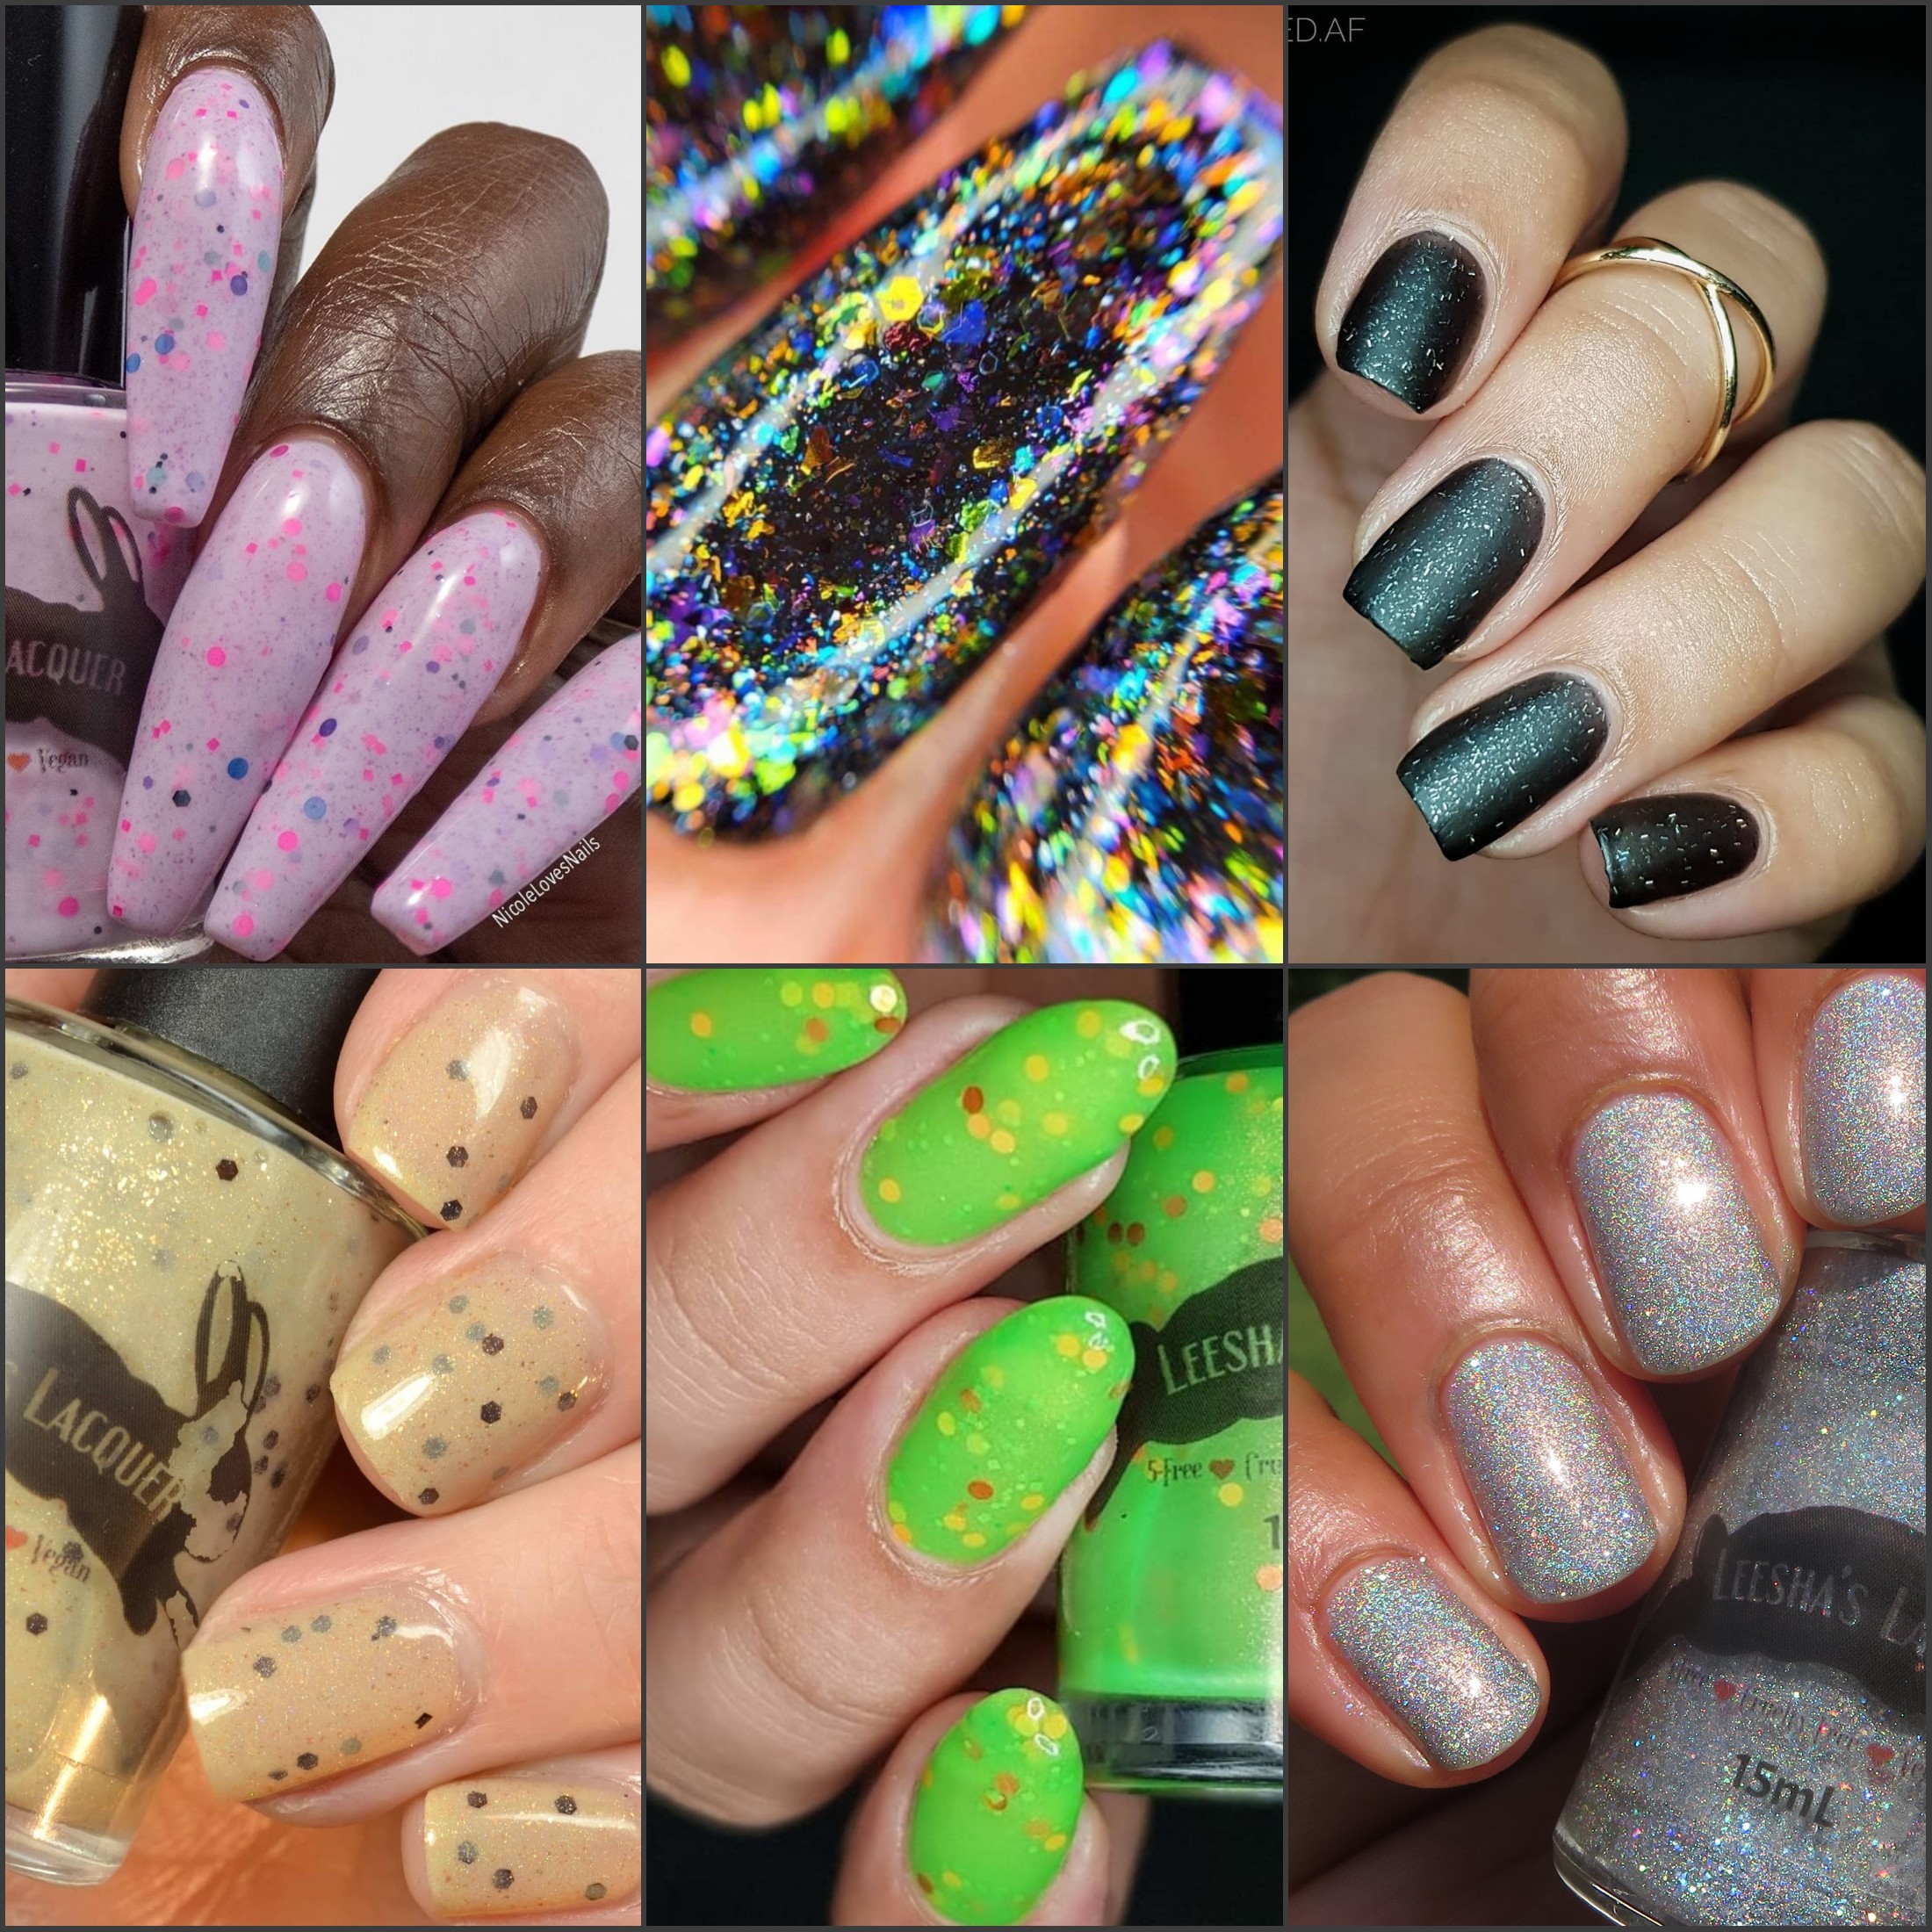 Collage of images of finger nail polish